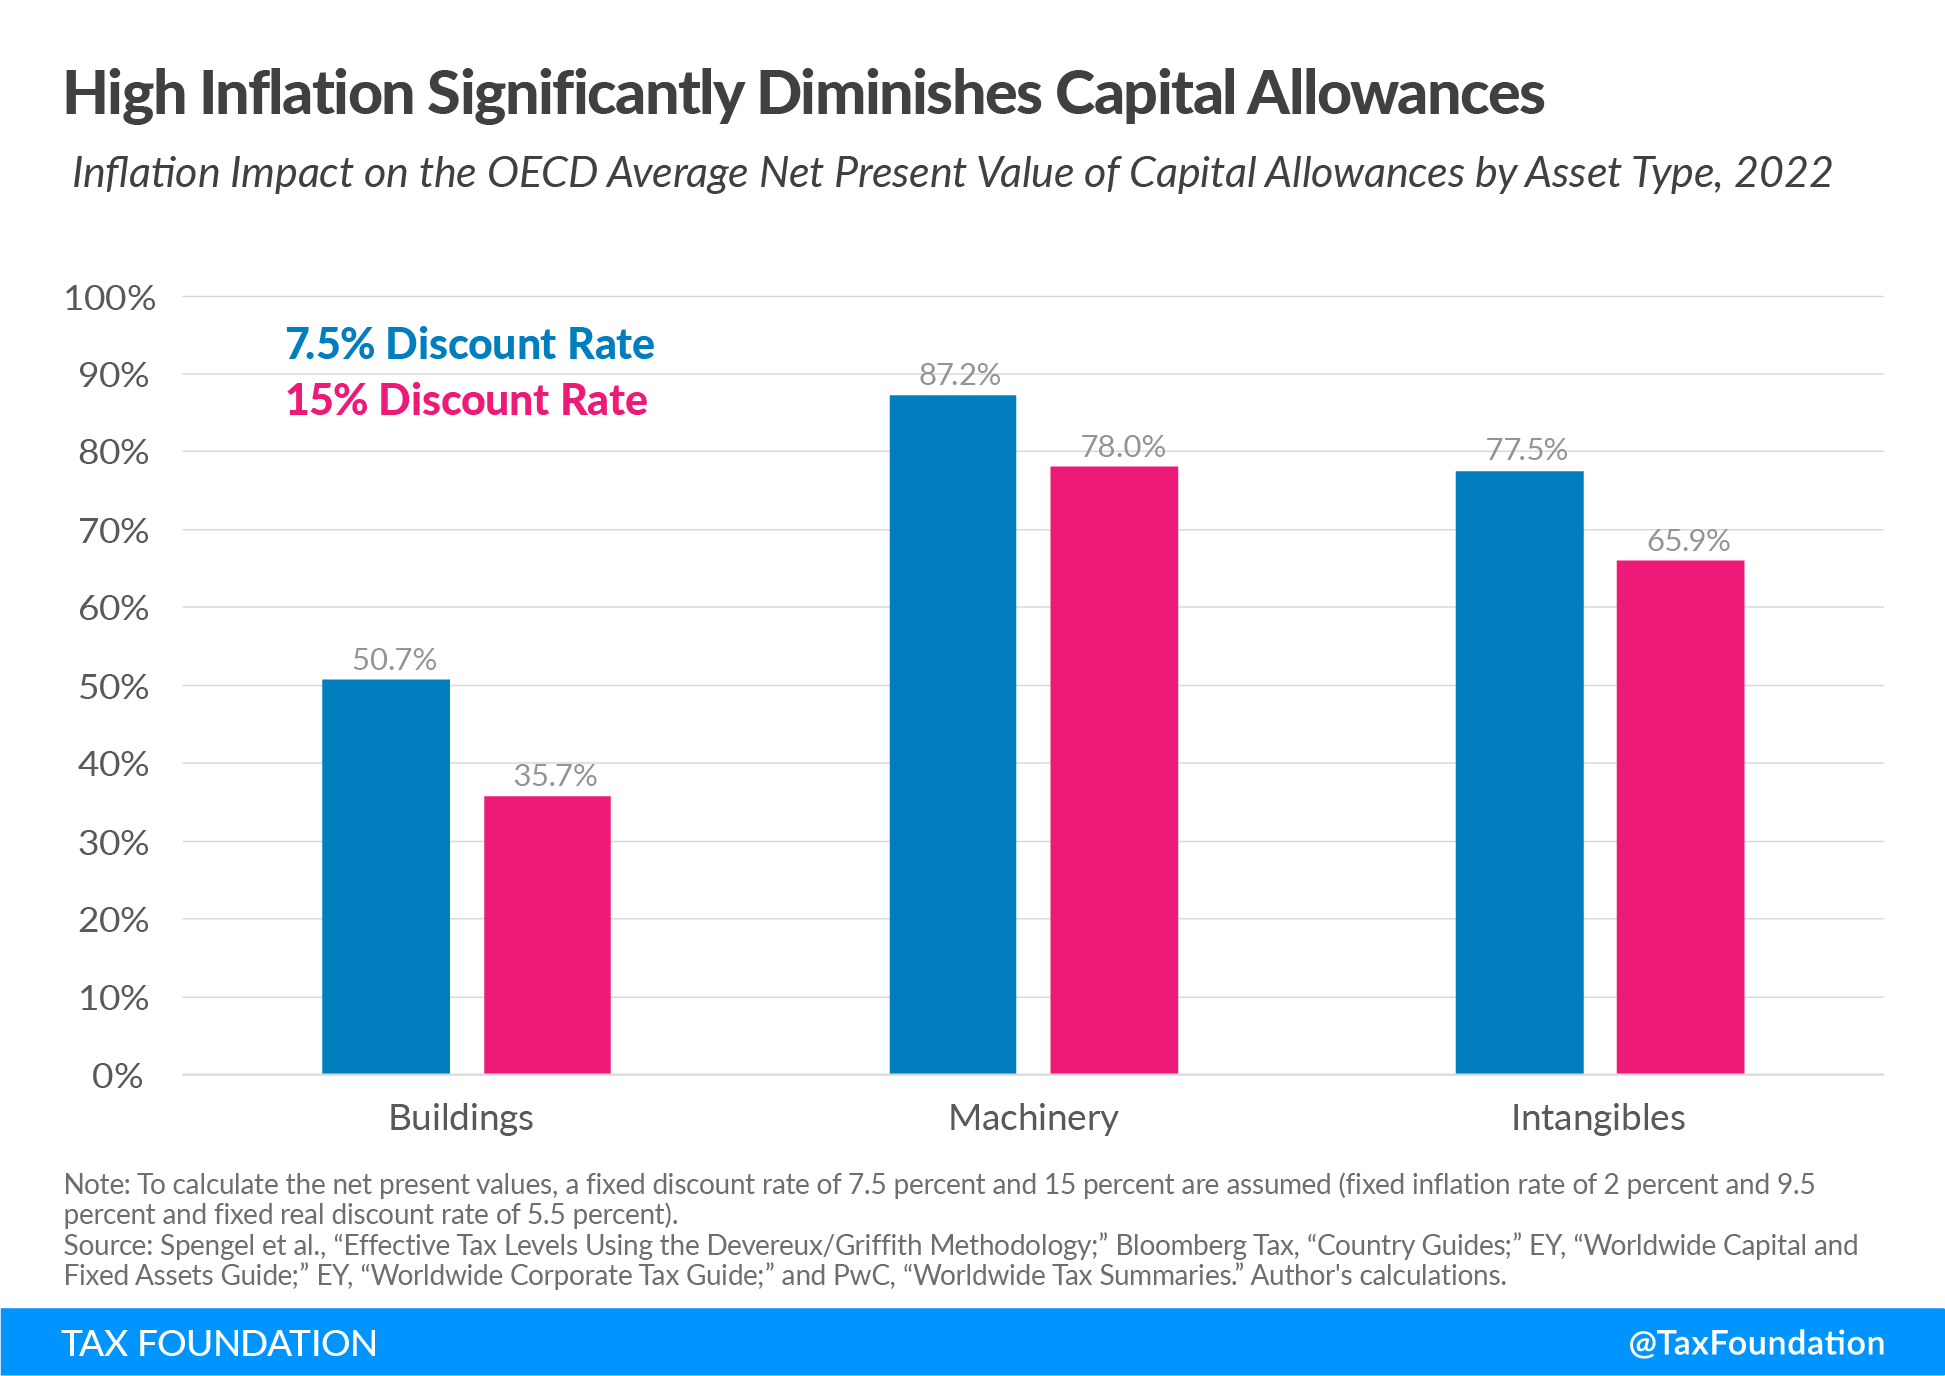 High inflation significantly diminishes capital allowances